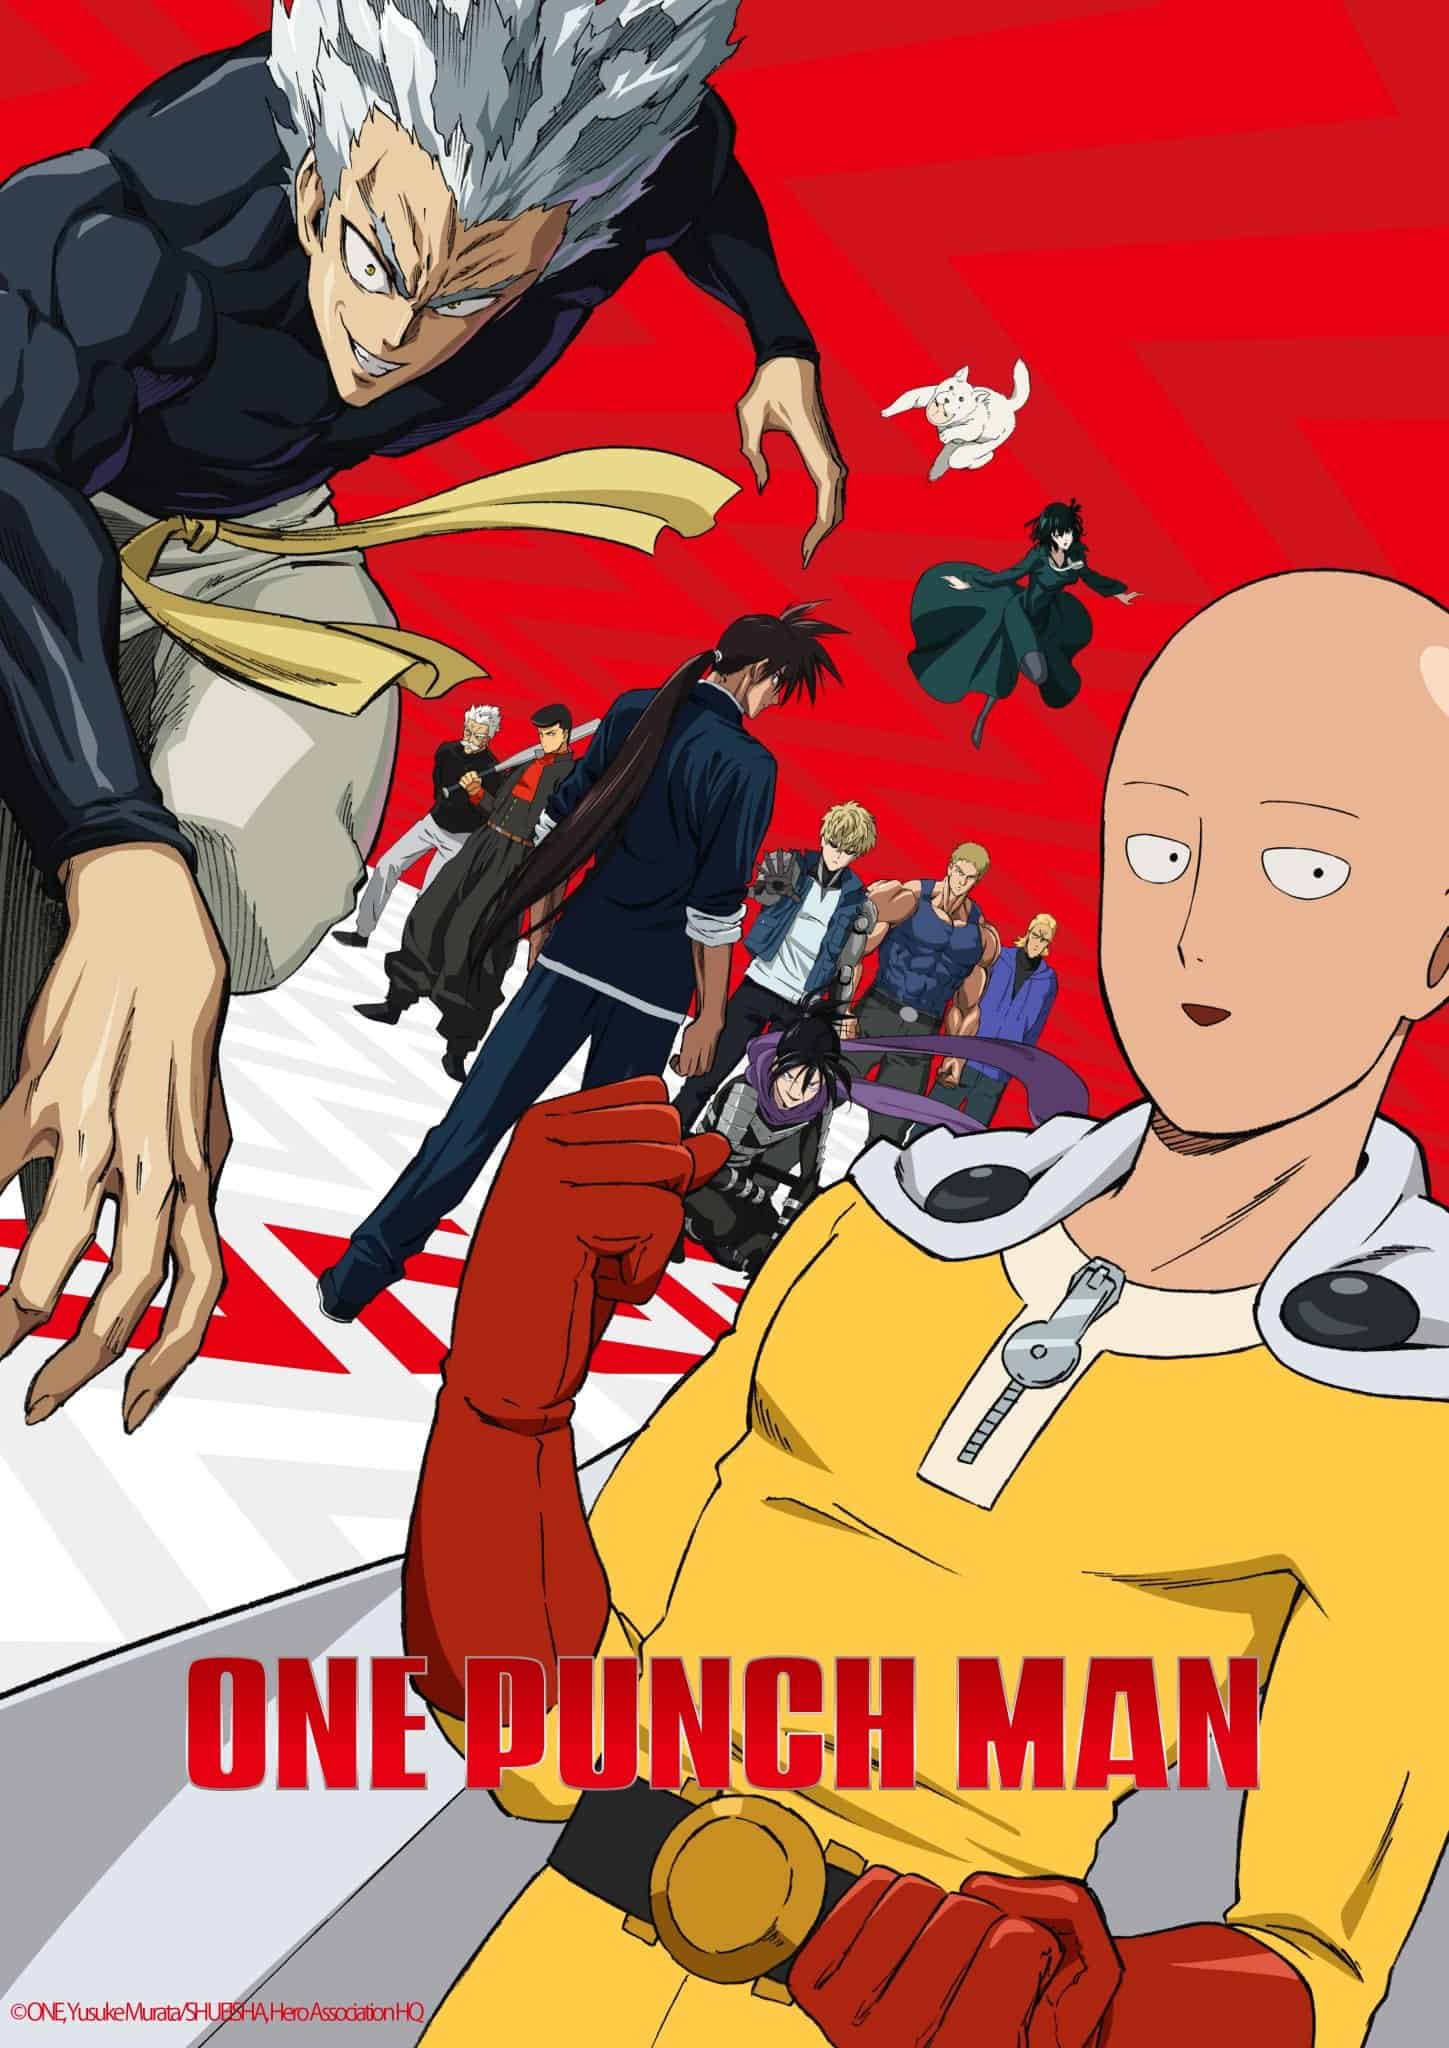 Why One-Punch Man: Season 2's Animation Is So Different - IGN